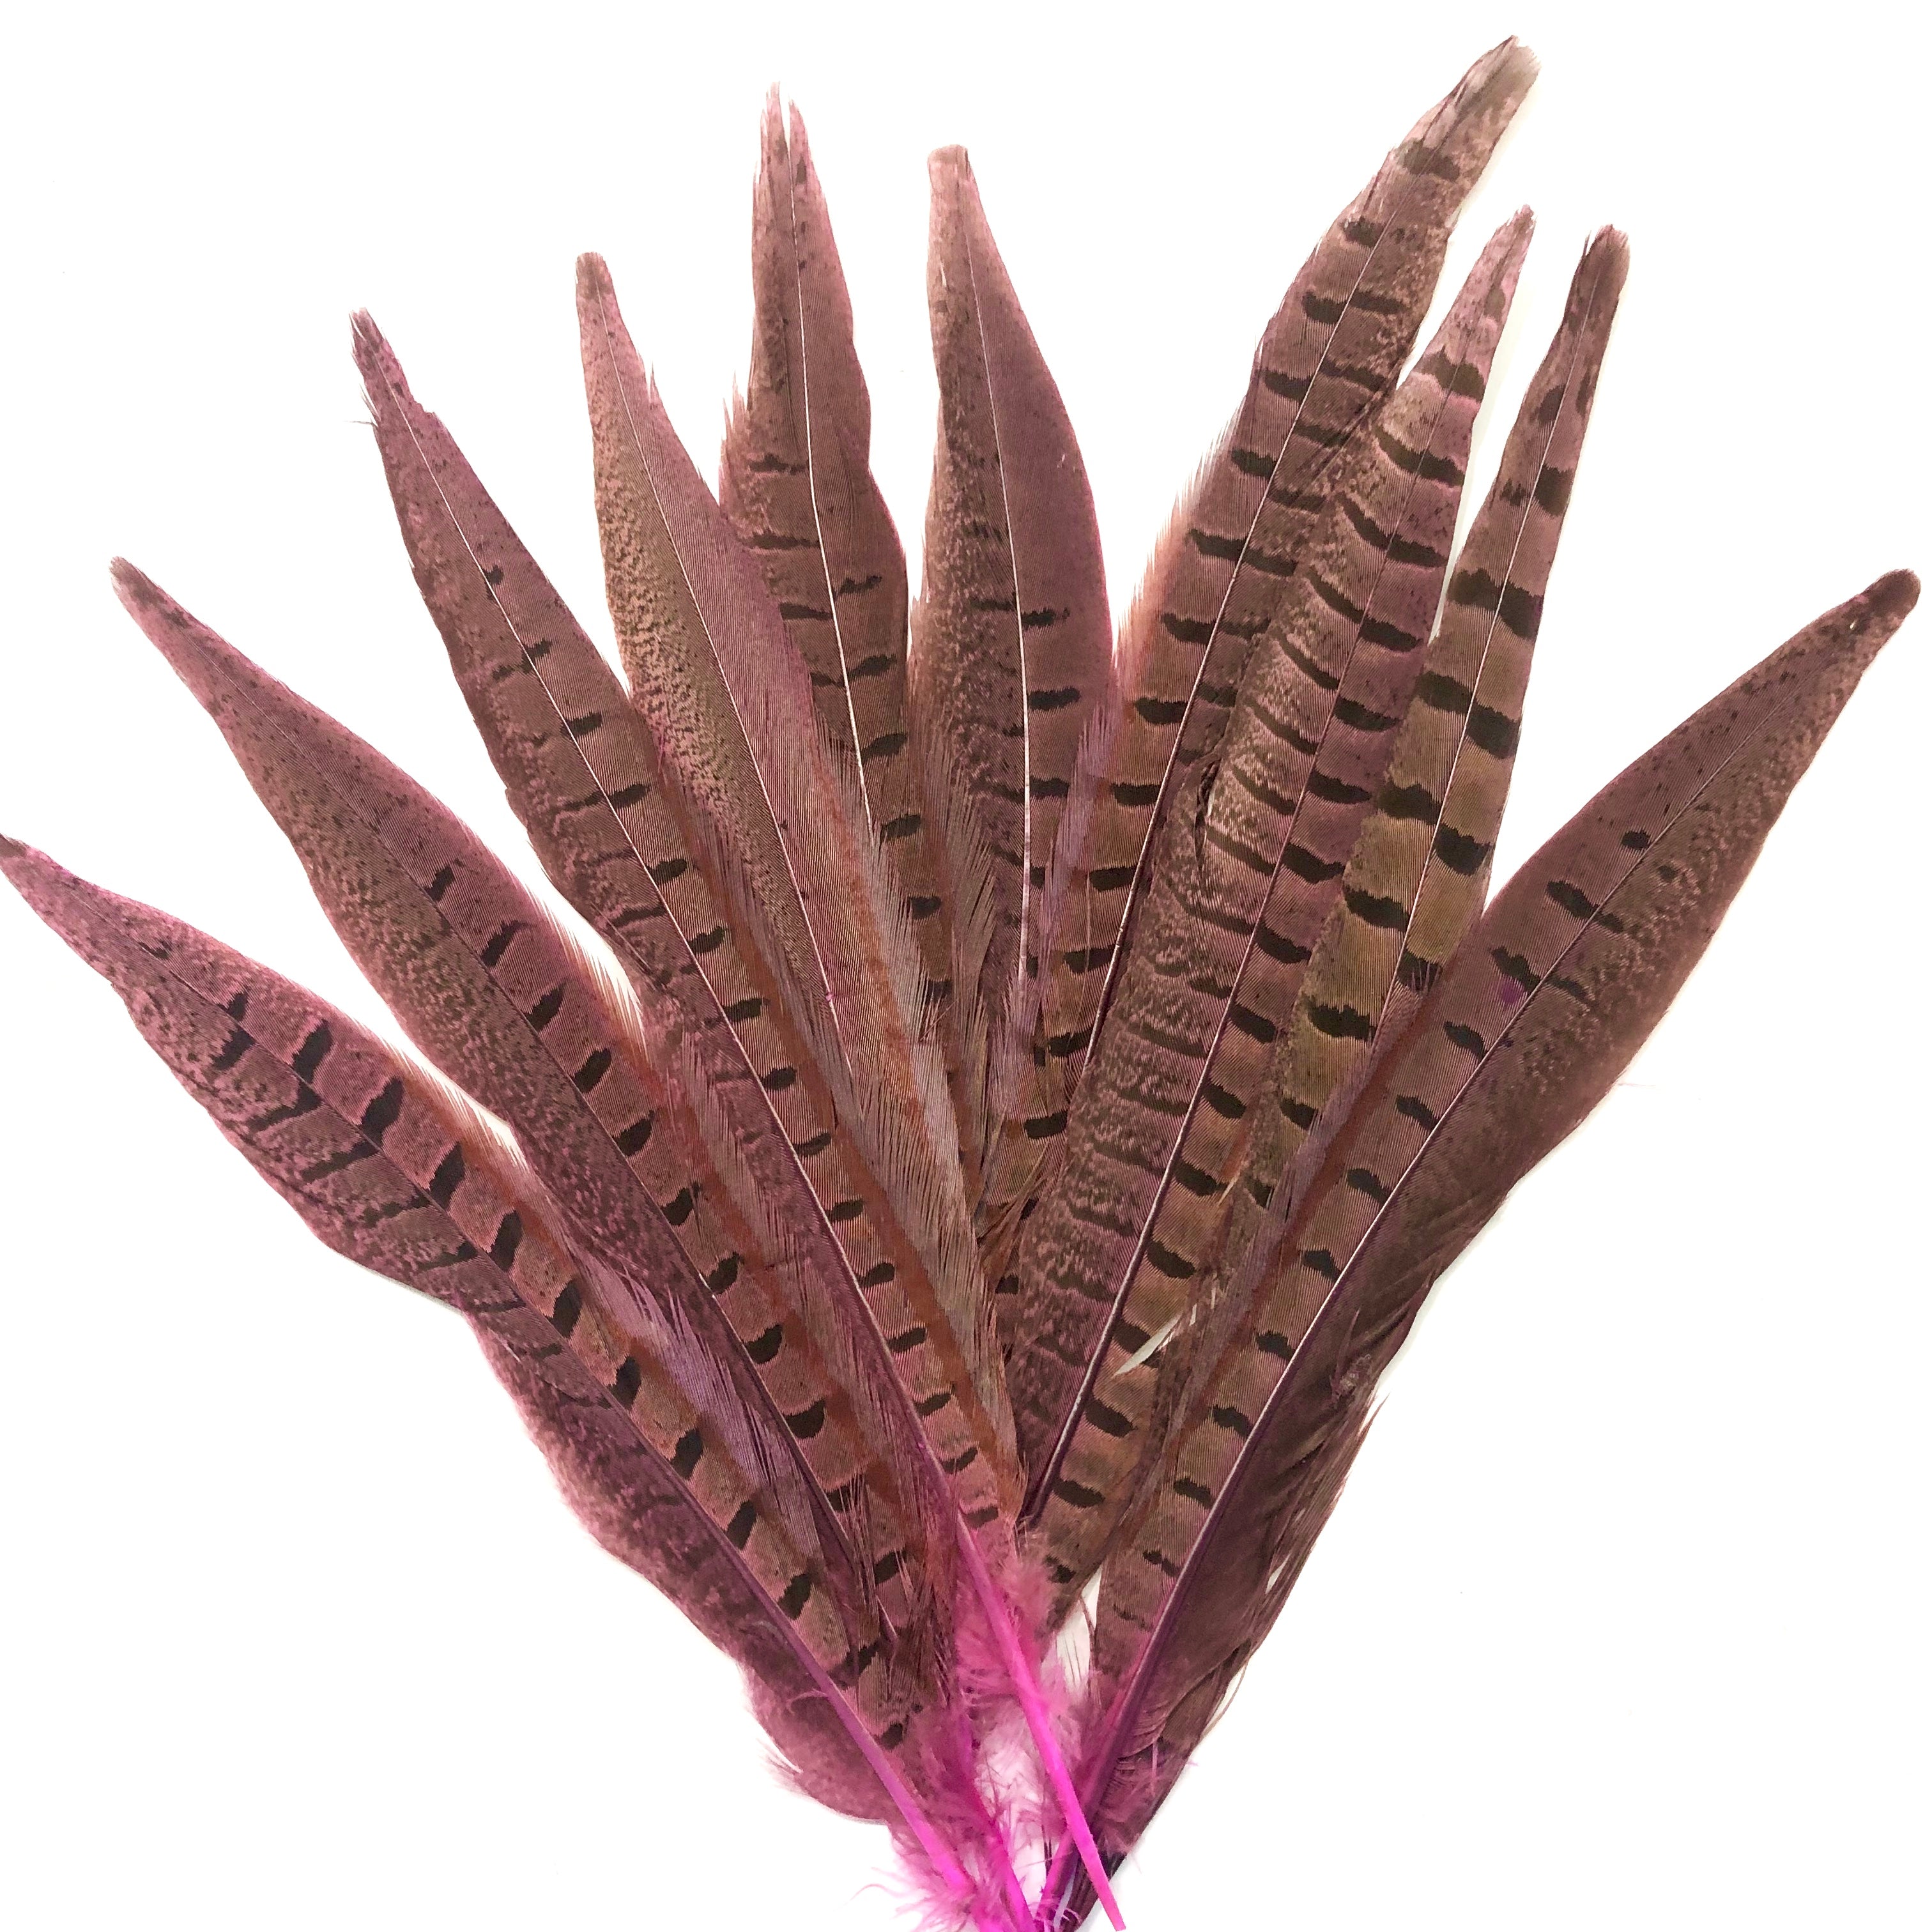 6" to 10" Ringneck Pheasant Tail Feather x 10 pcs - Hot Pink